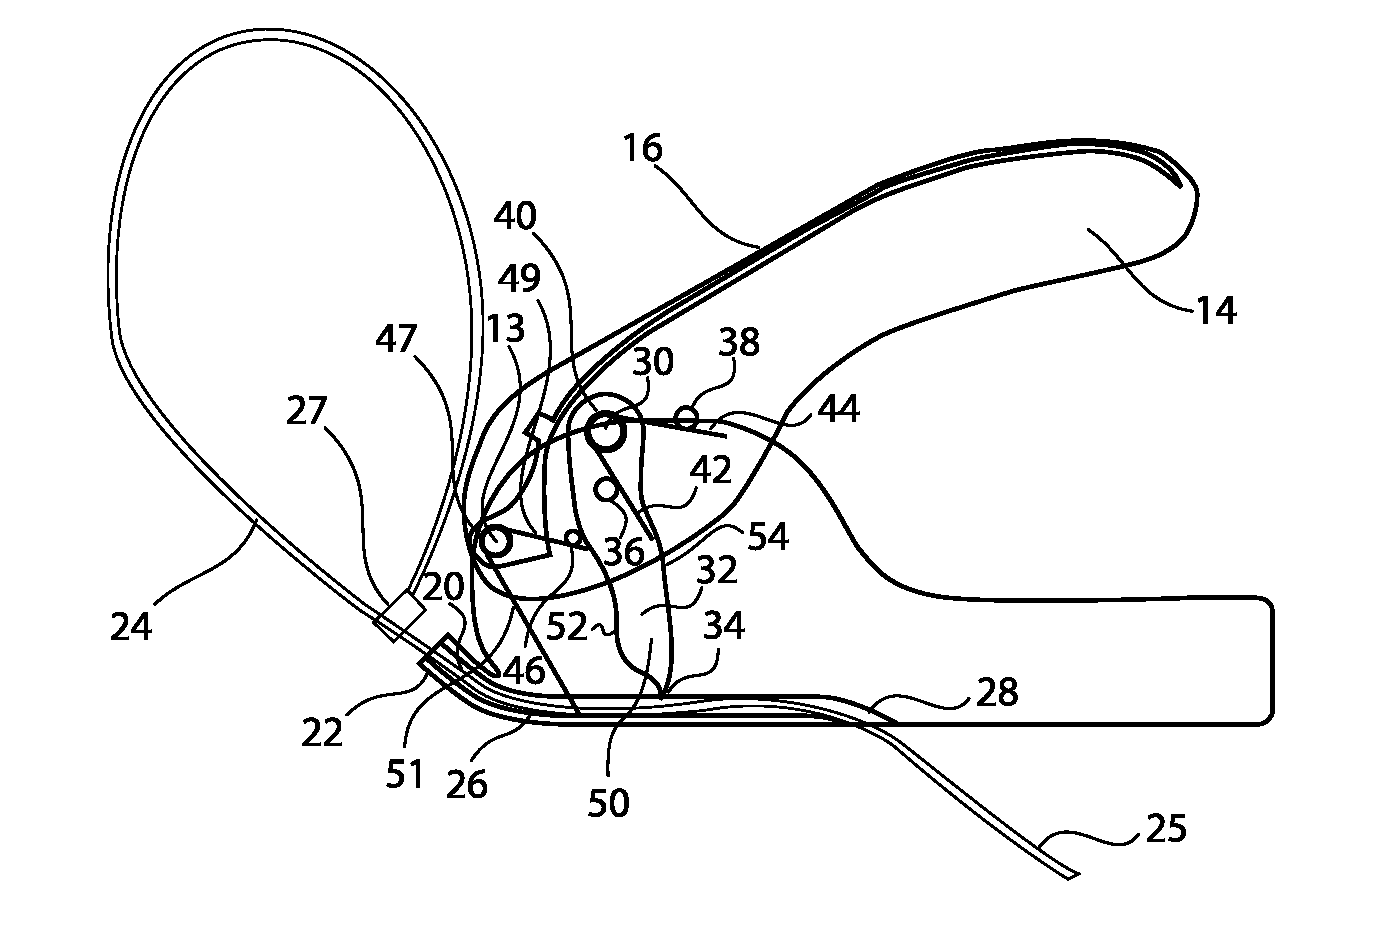 Thoracic Closure Device and Methods